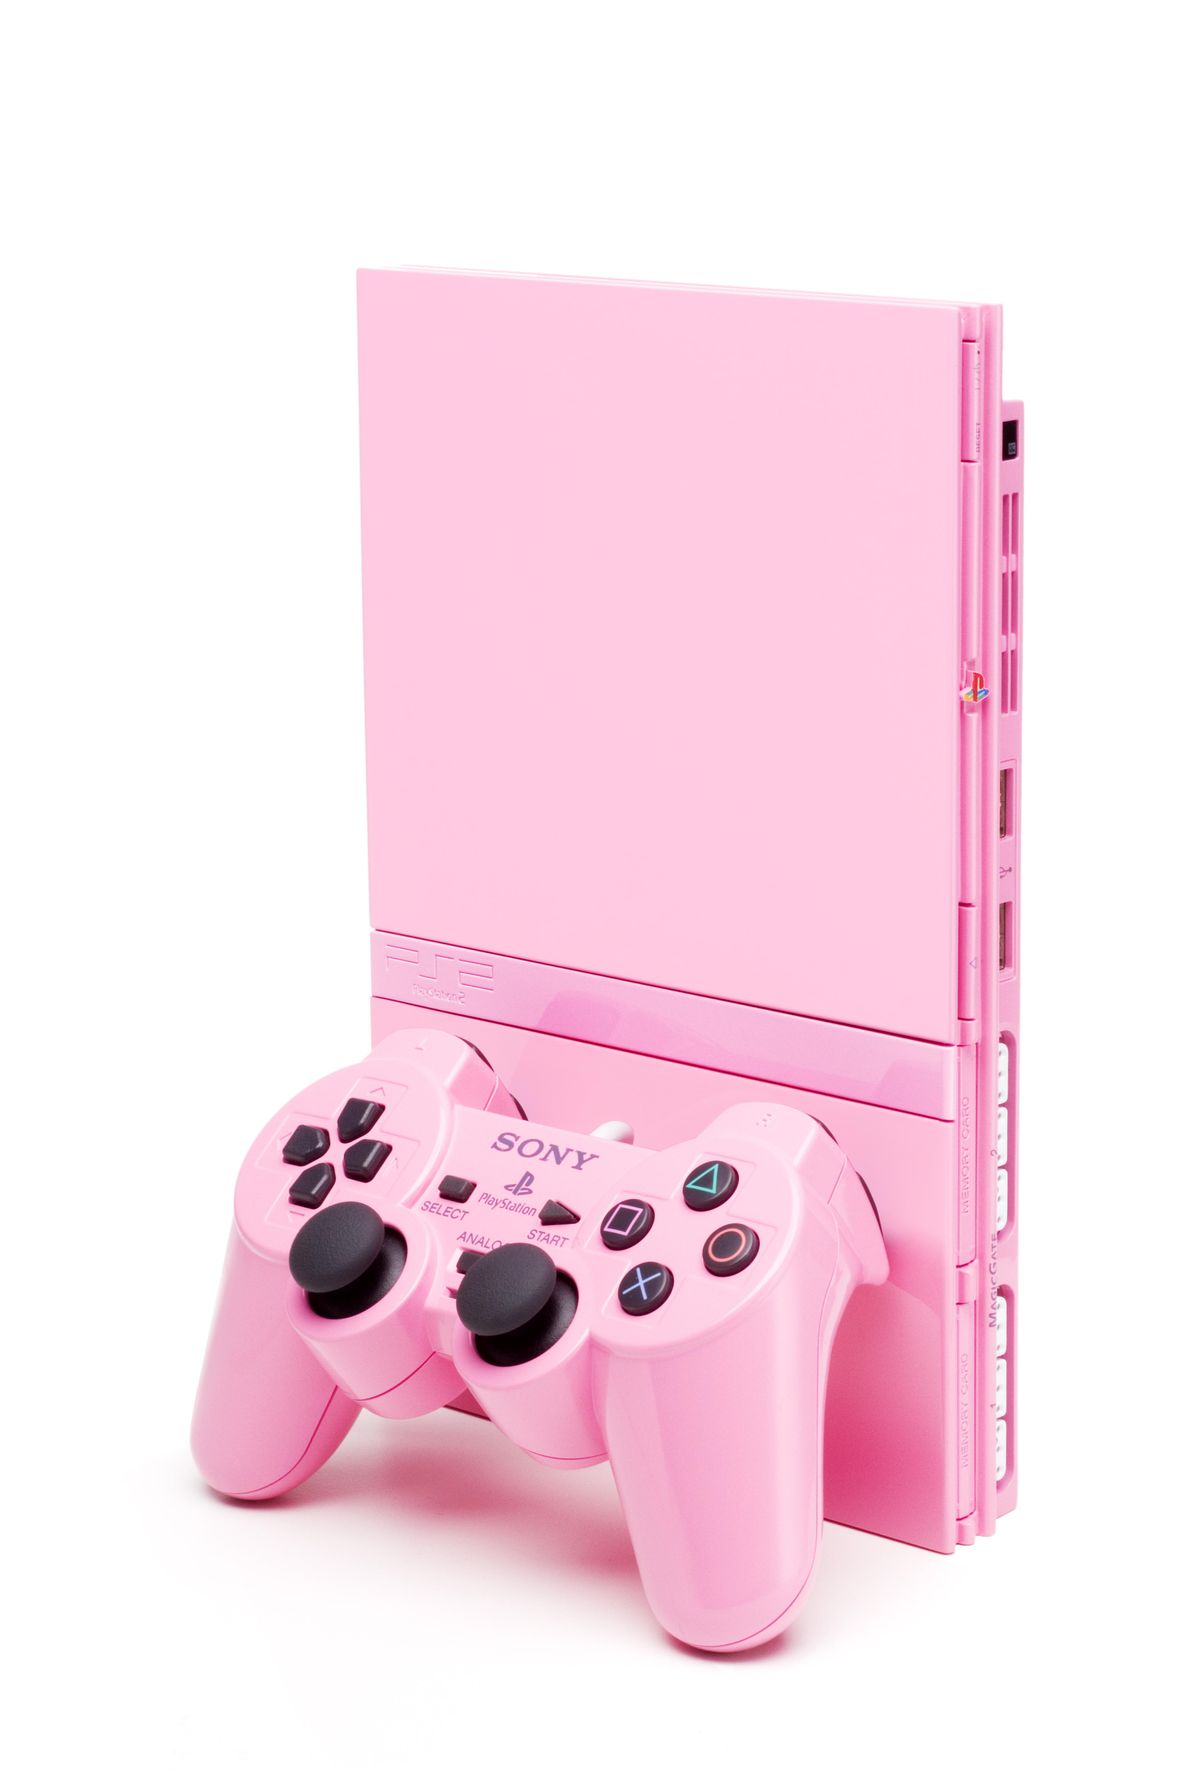 My pink Ps2 slim I bought few months ago to play online Ps2 games like  twisted metal :3 some if ps2 online games are revived by some of groups on  discord. 